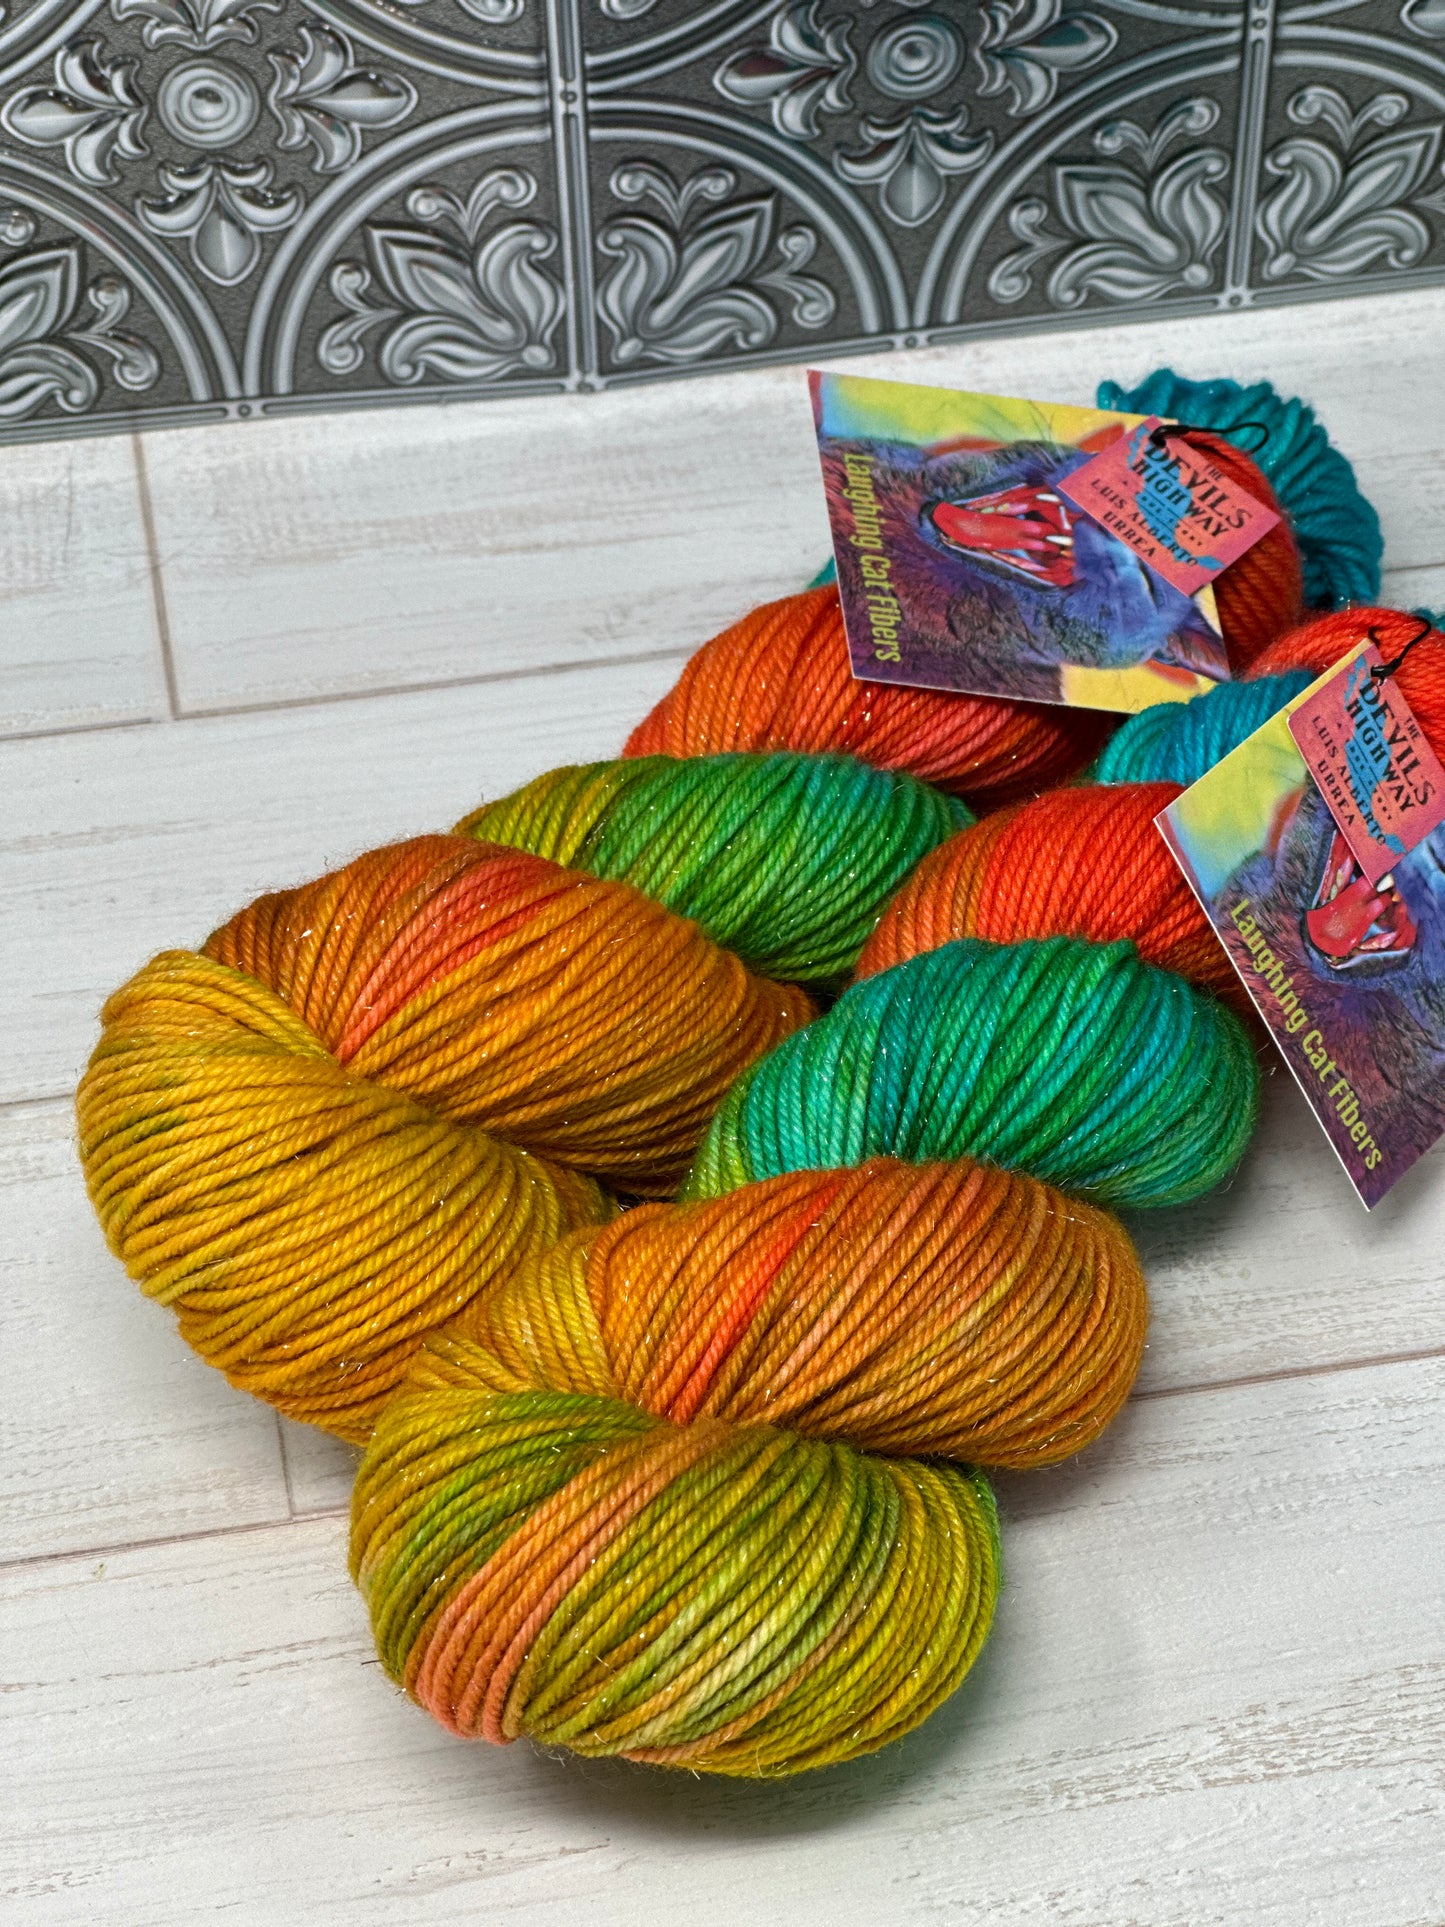 Banned Books Yarn Club: “The Devil's Highway” on Various Yarn Bases